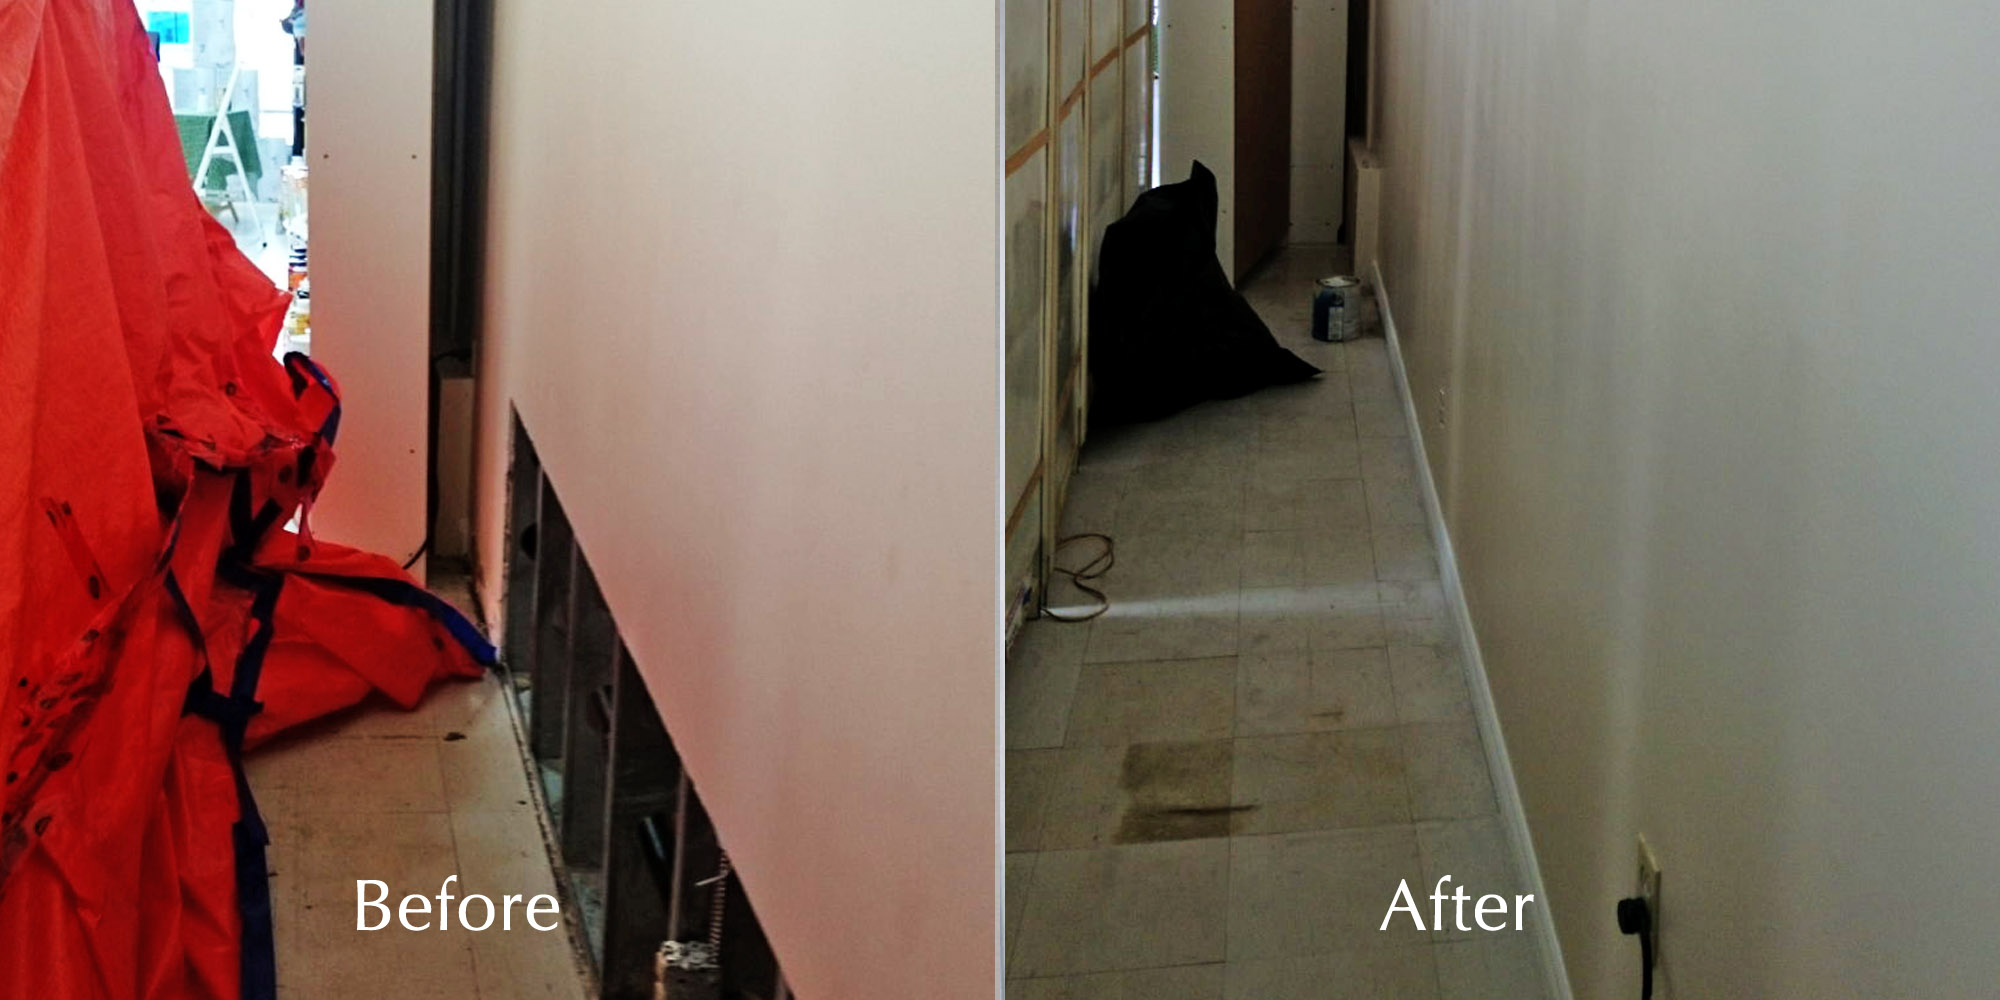 Before and After pictures of a hallway that needed wall repair